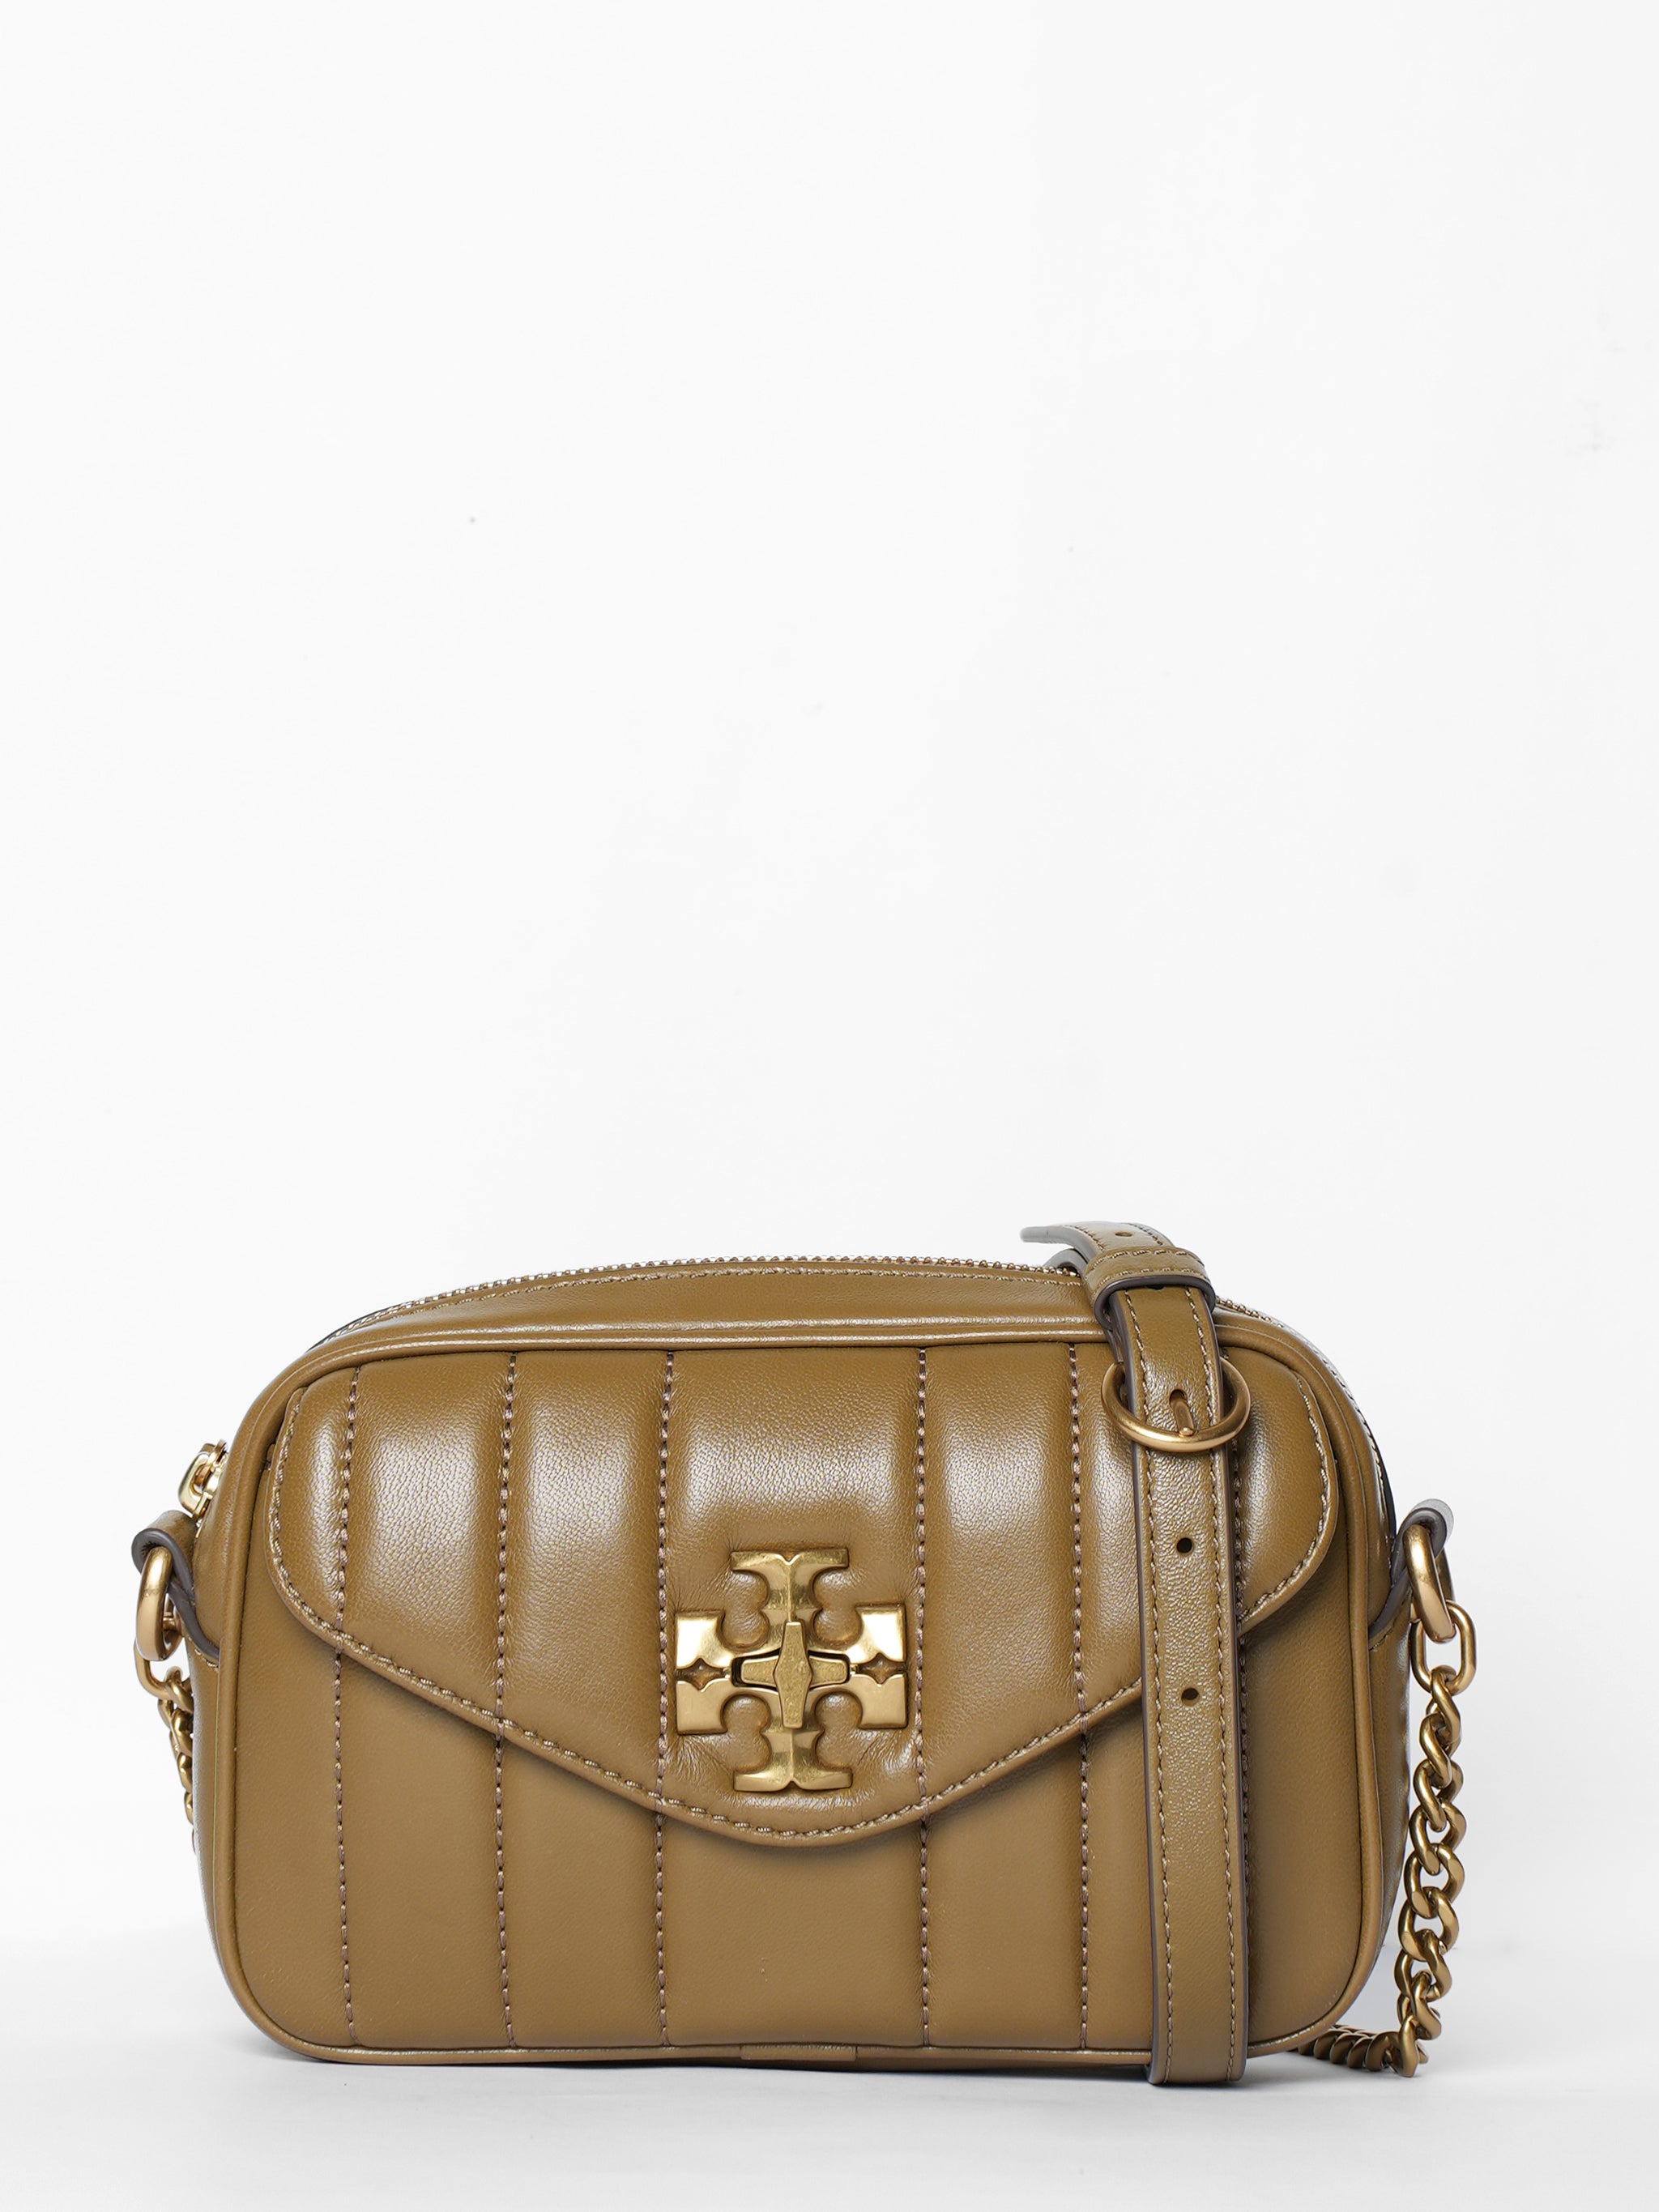 New Tory Burch Kira Quilted Camera Bag